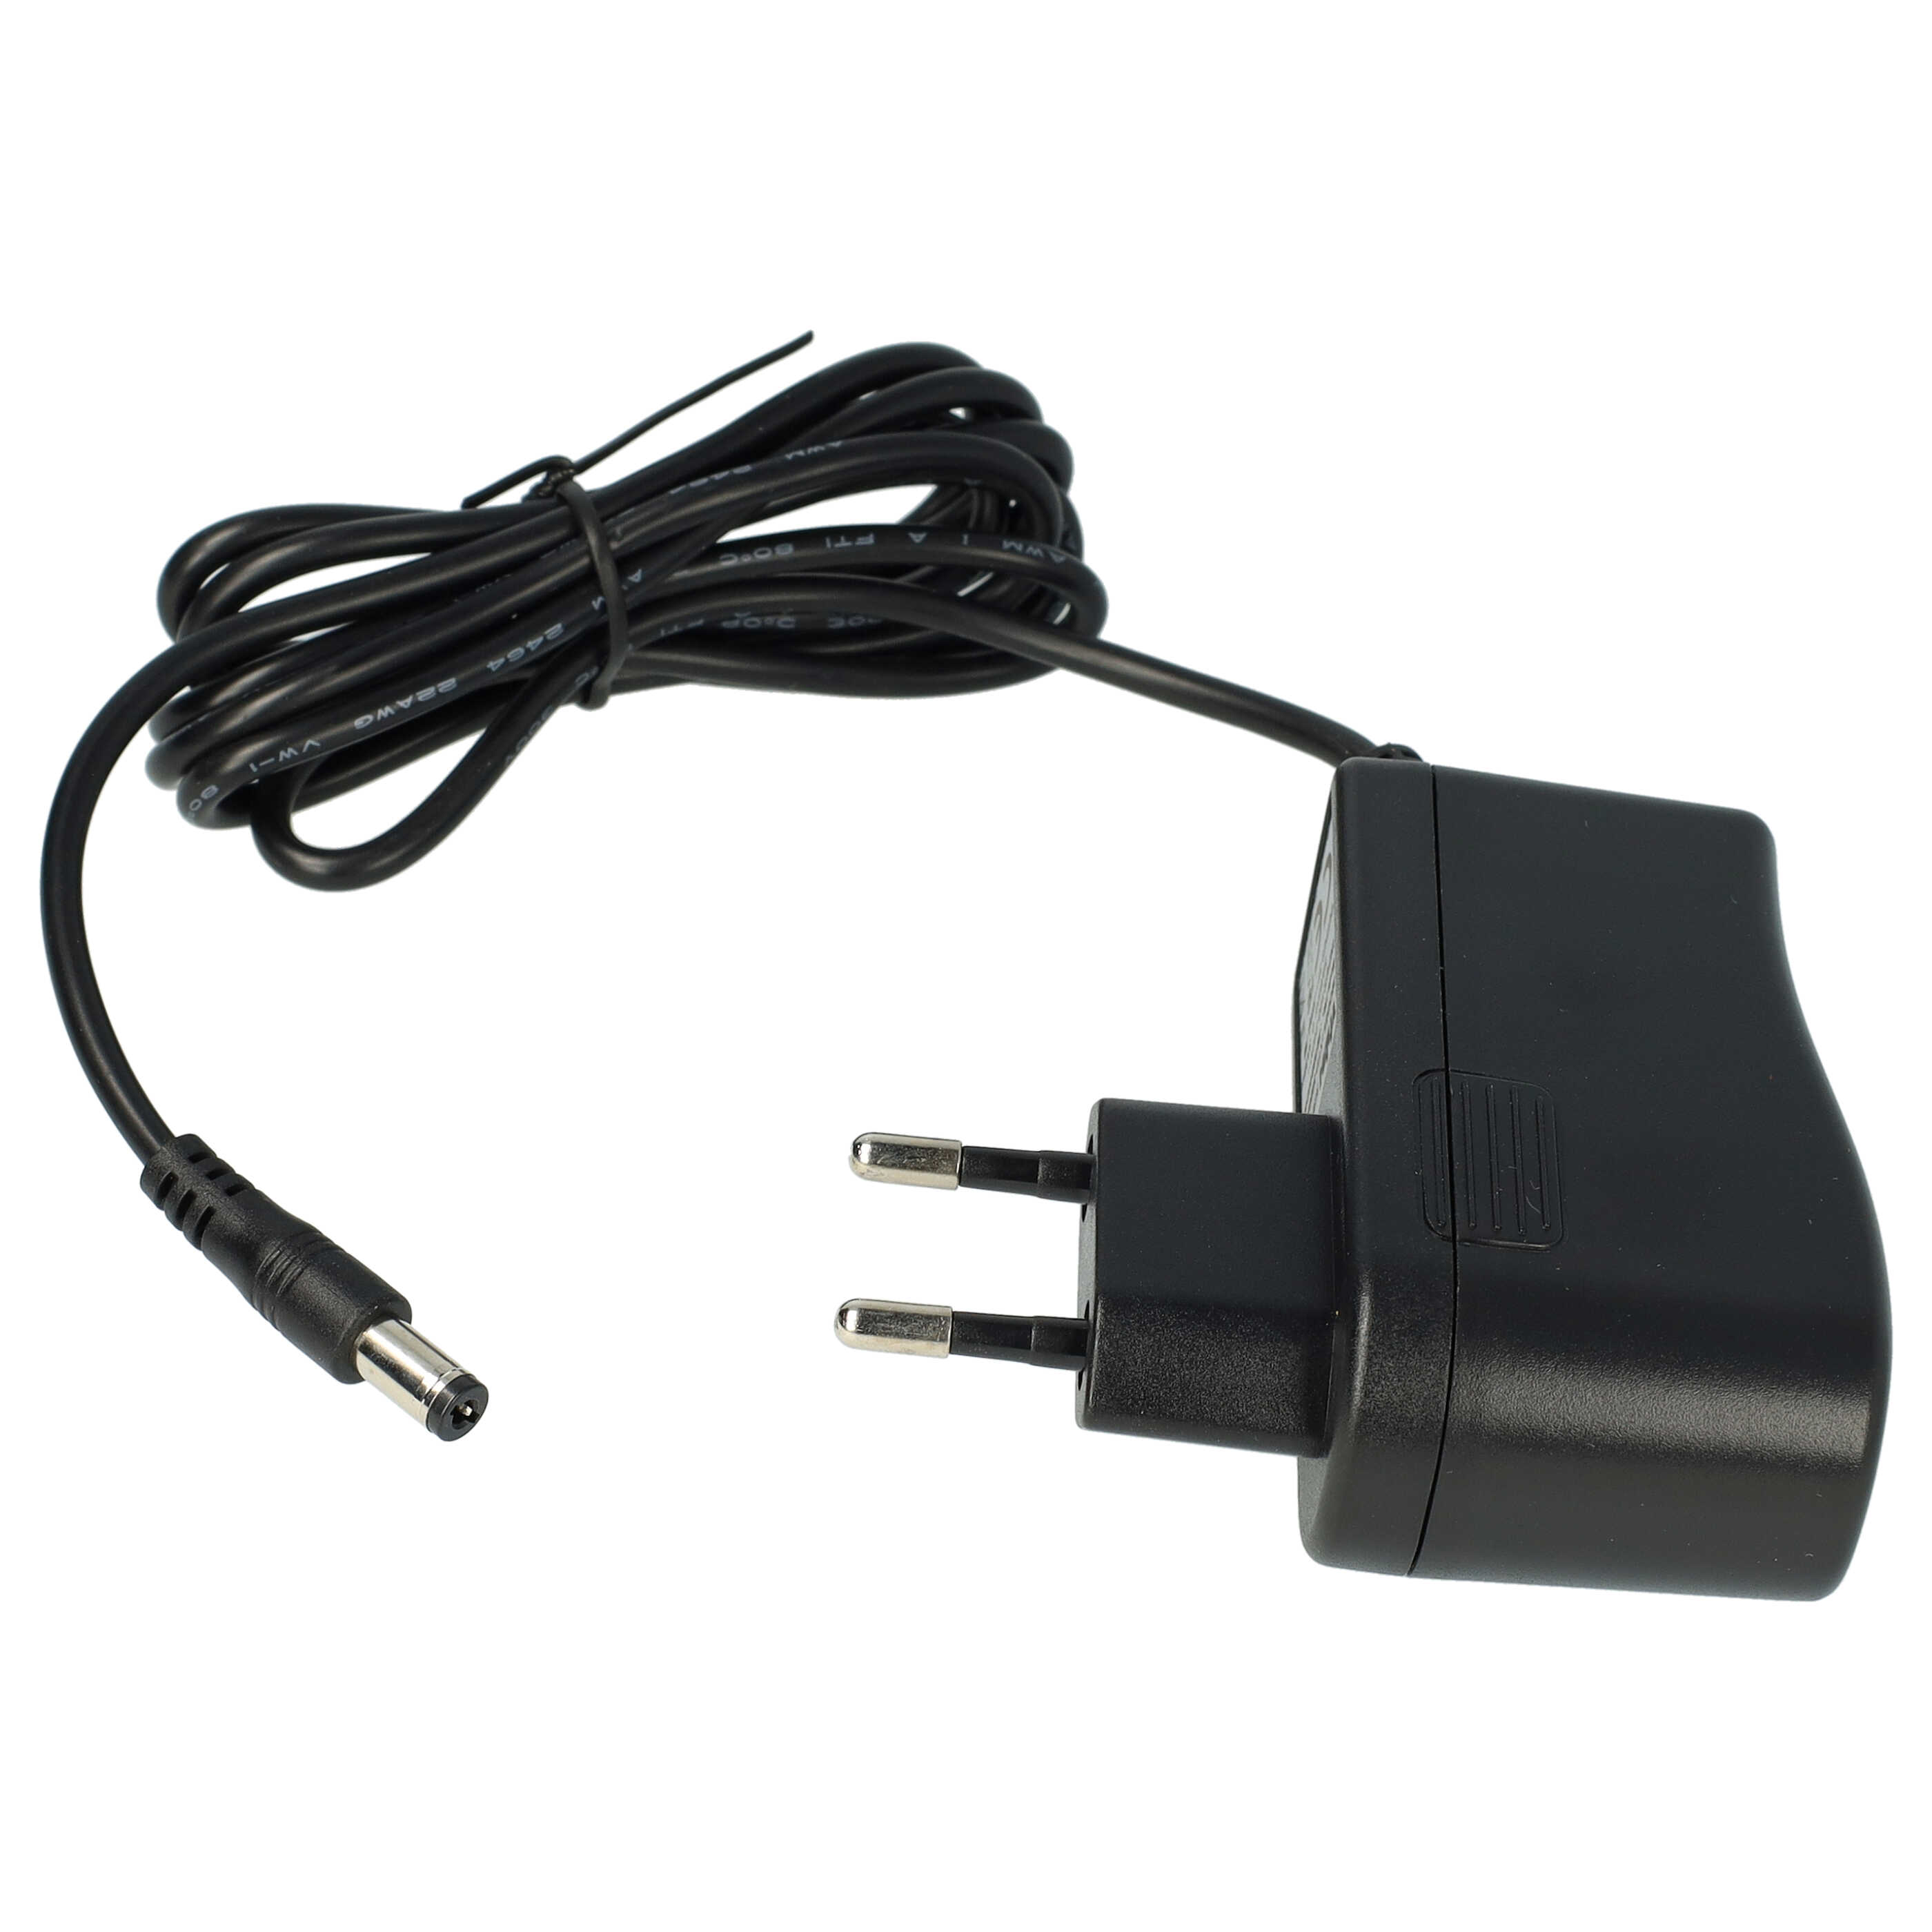 Mains Power Adapter with 5.5 x 2.1 mm Plug suitable for various Electric Devices - 3 V, 2 A